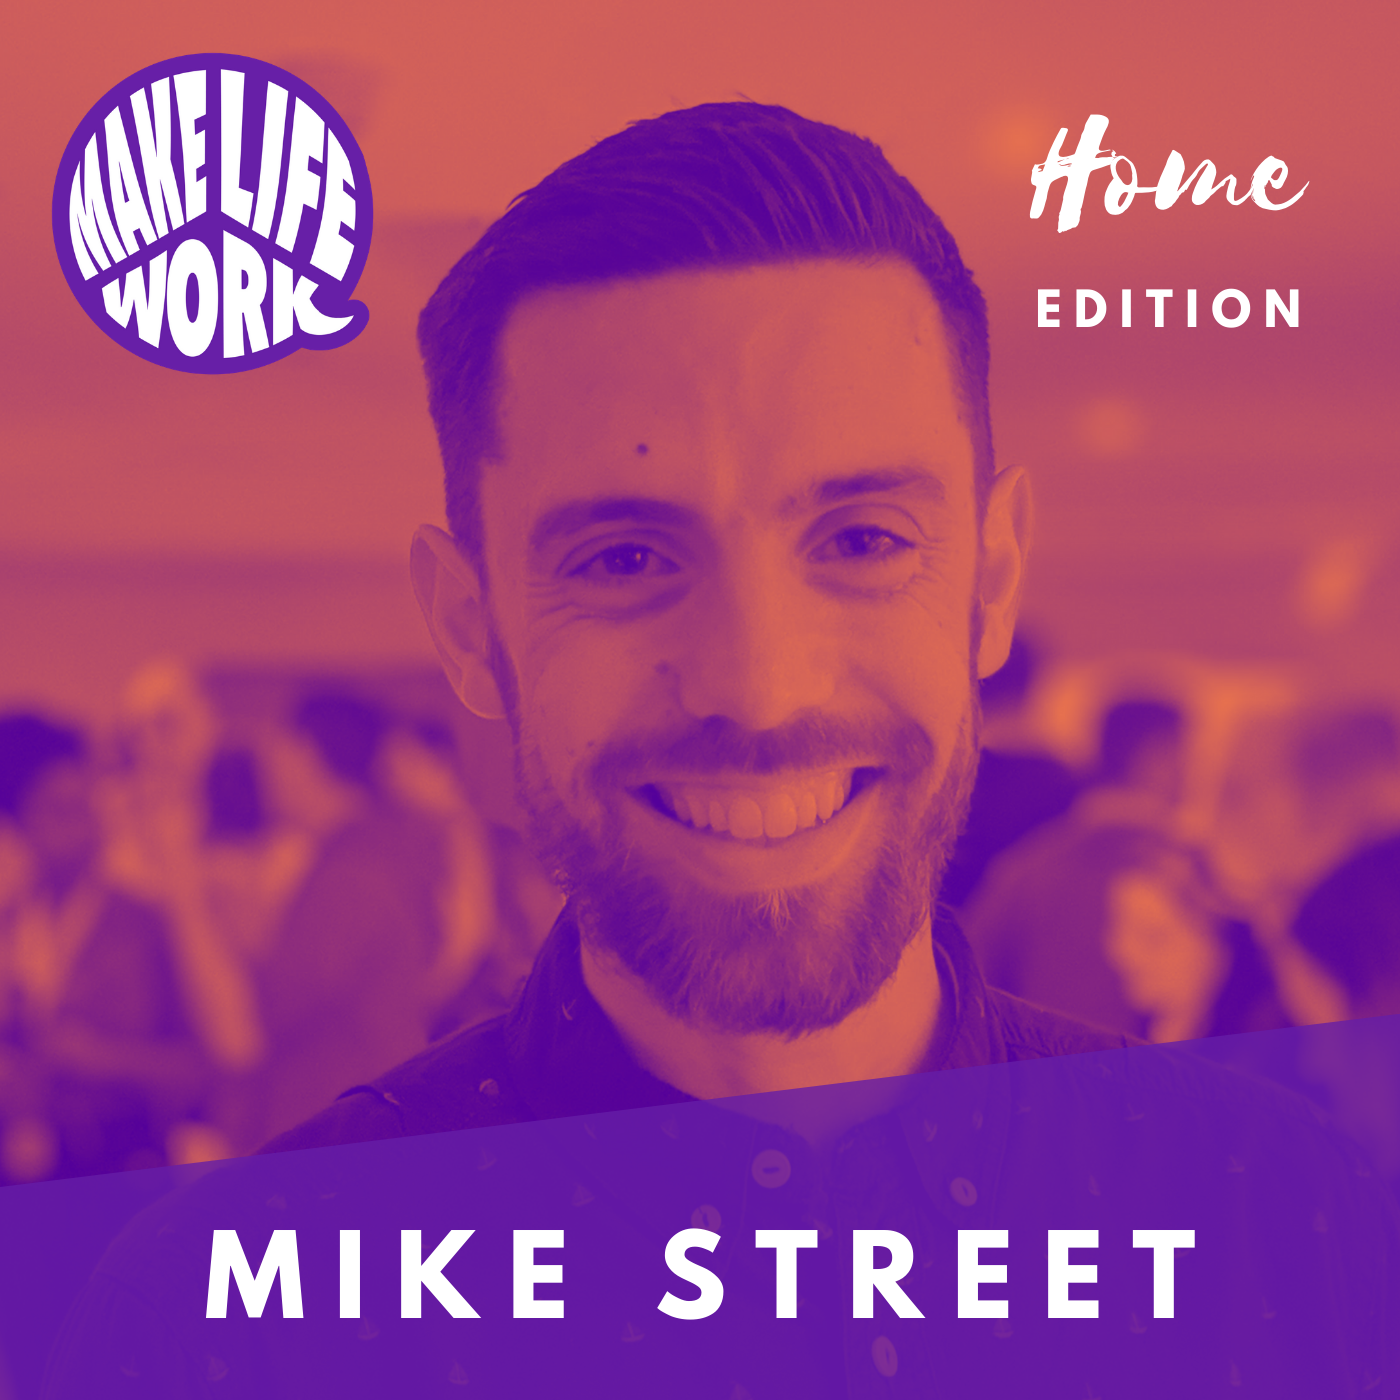 Make Life Work with Mike Street